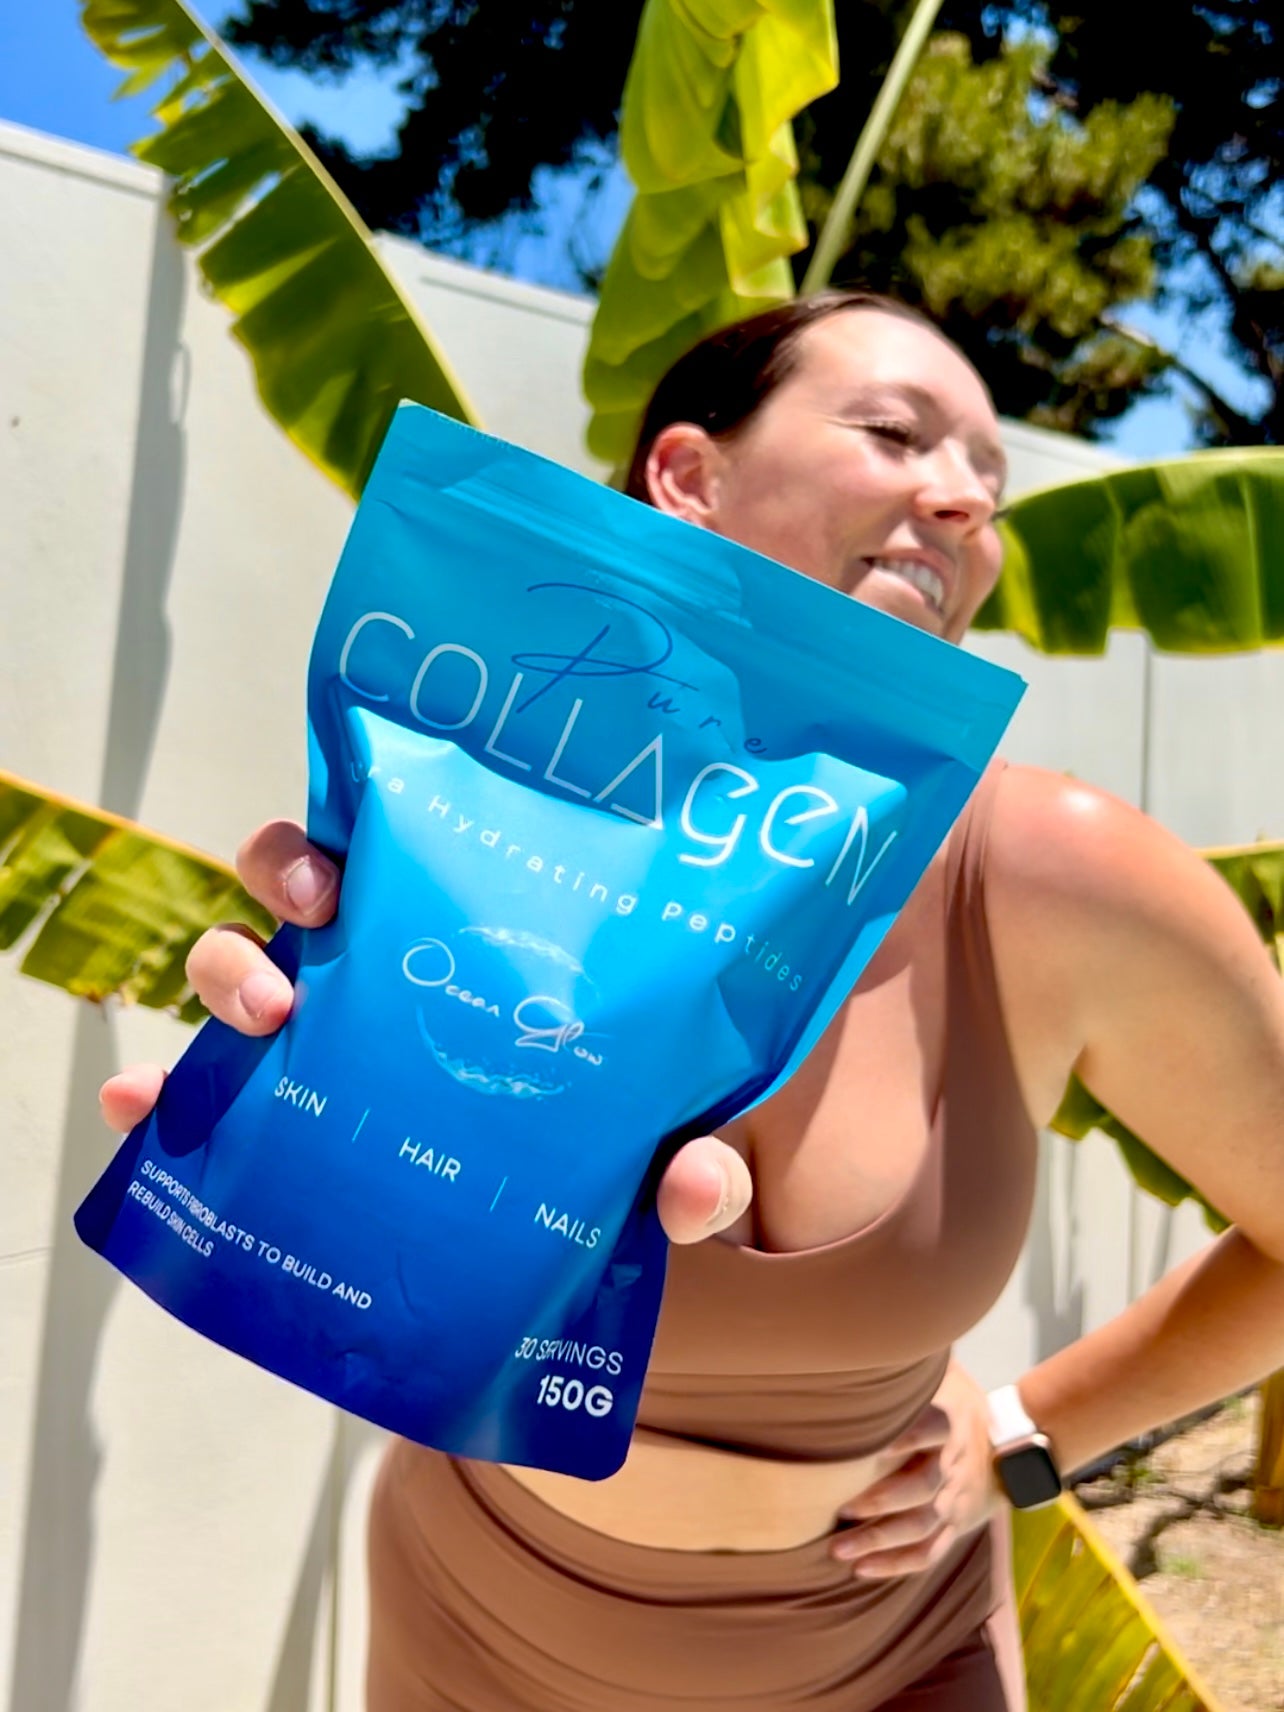 Pure Collagen - Ultra Hydrating Peptides 150g